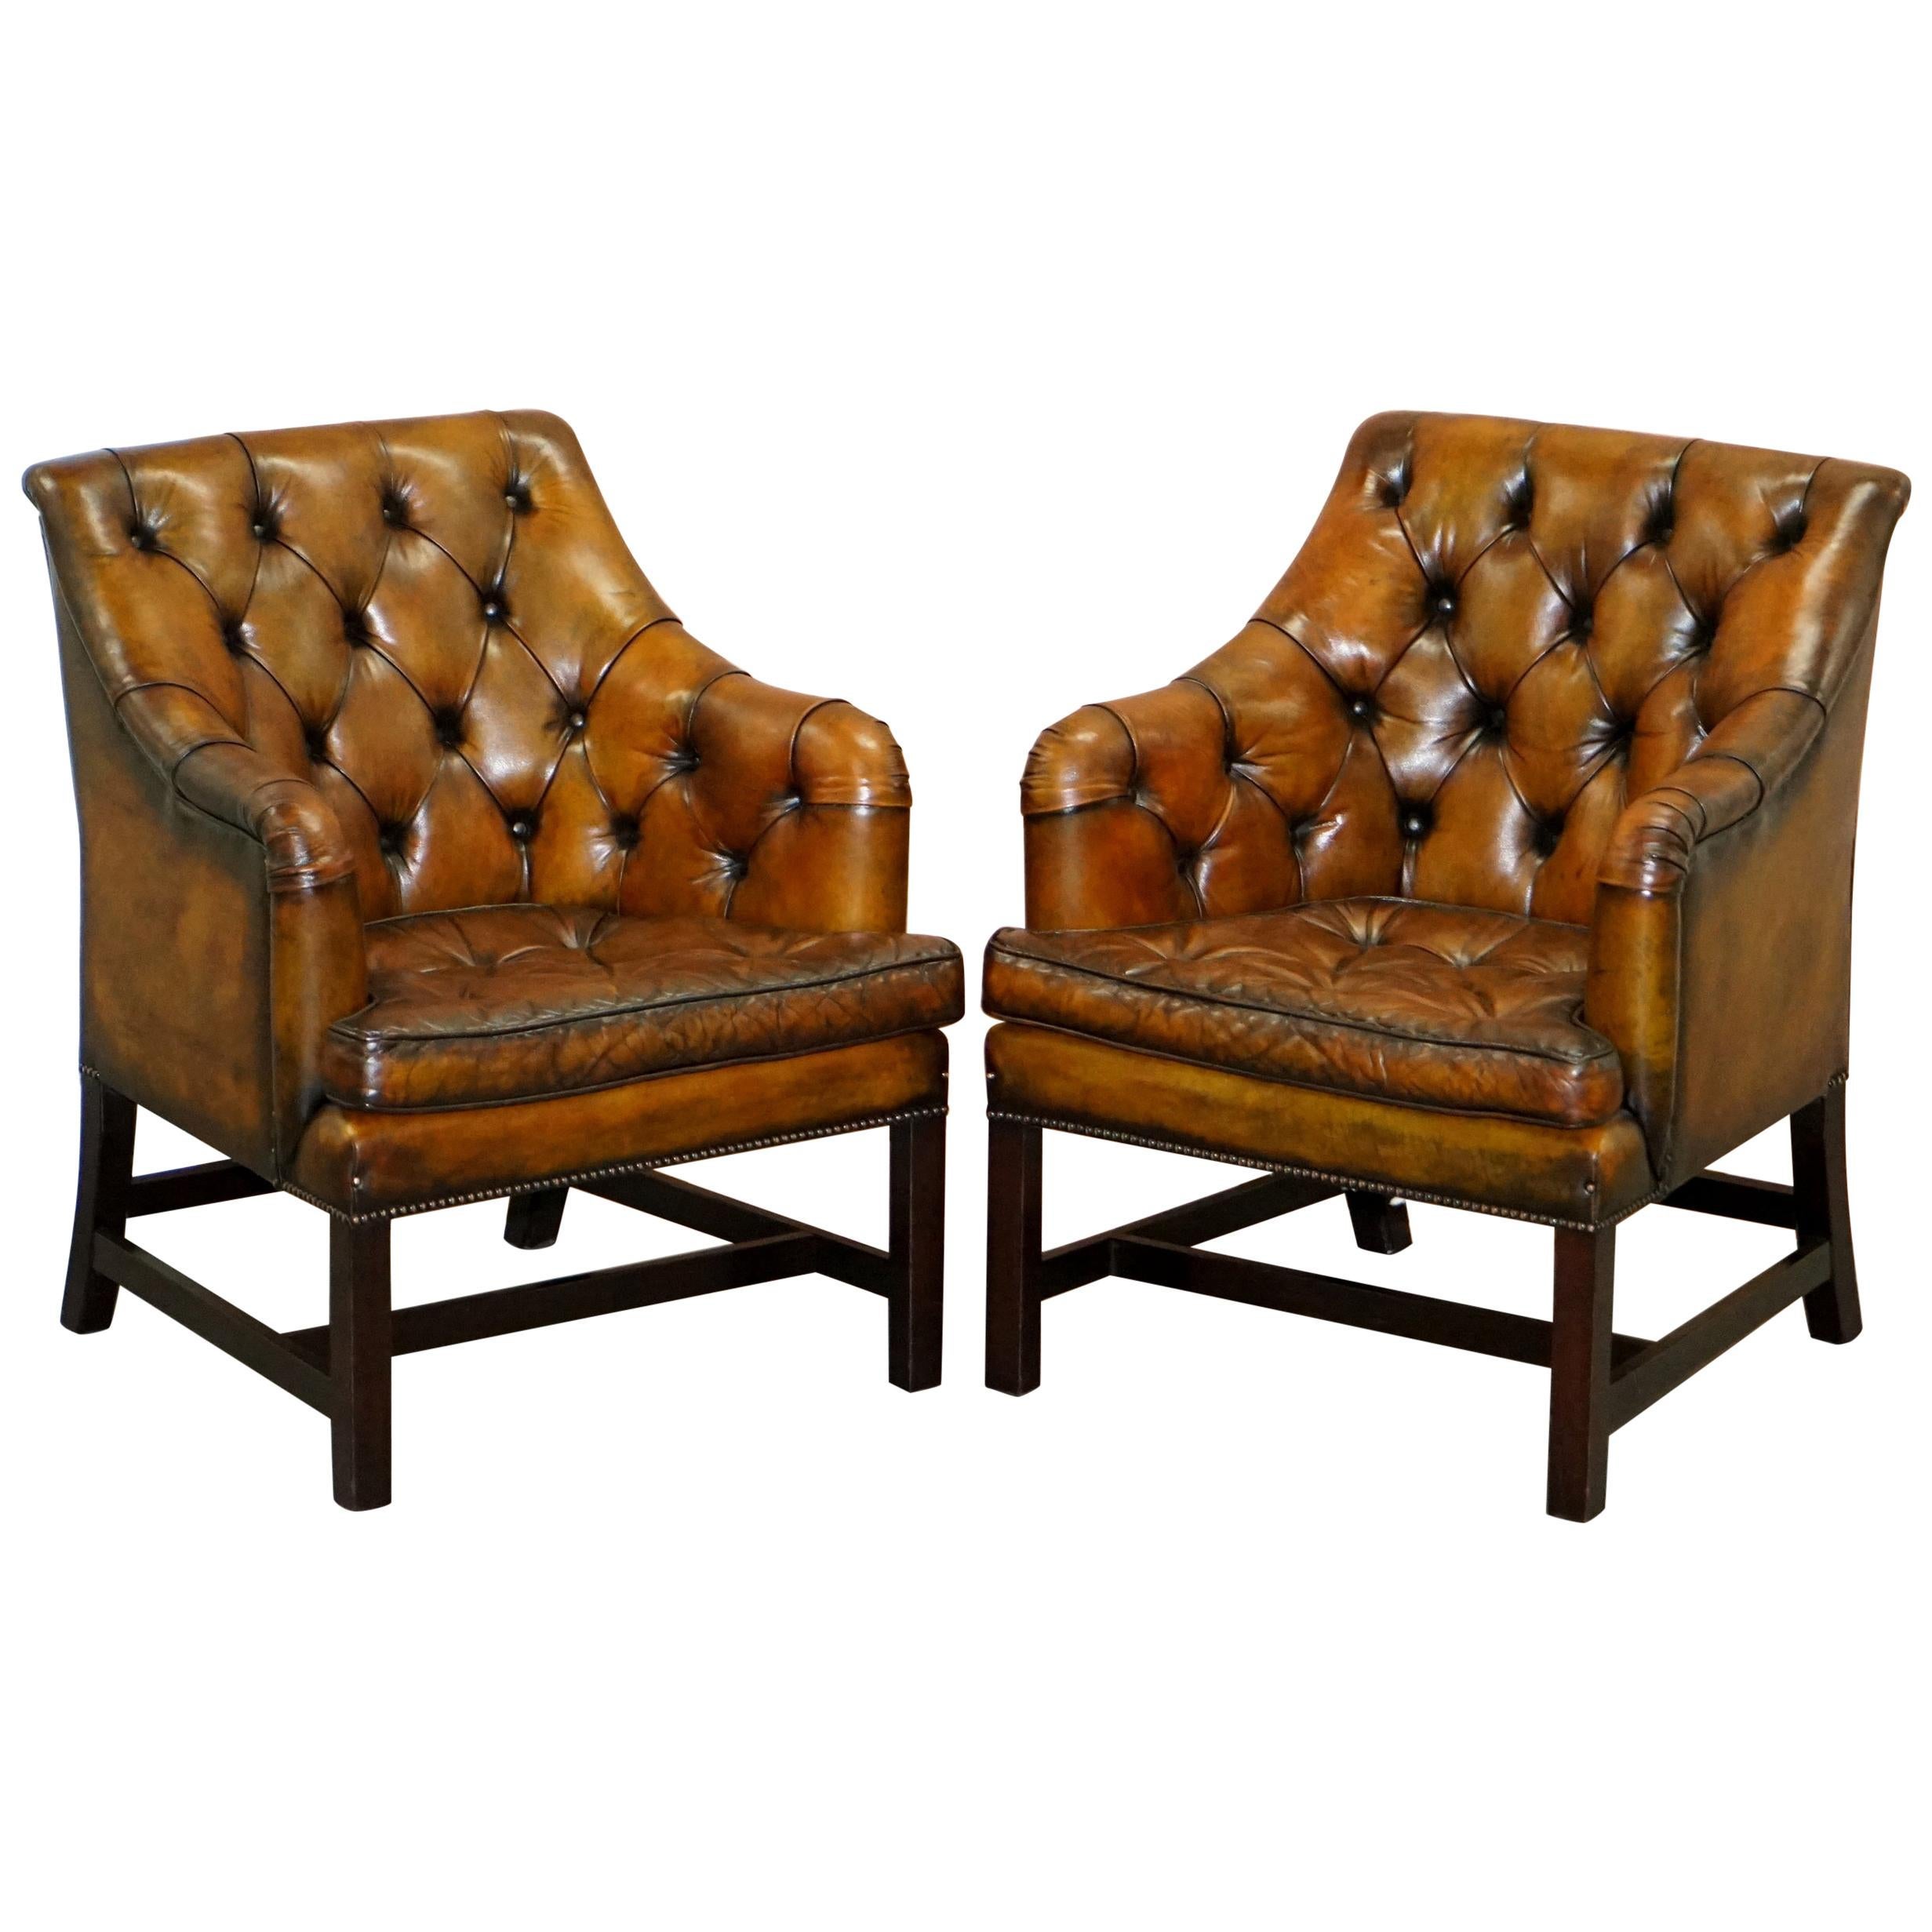 Pair of George Smith Restored Brown Leather Georgian Armchairs Desk